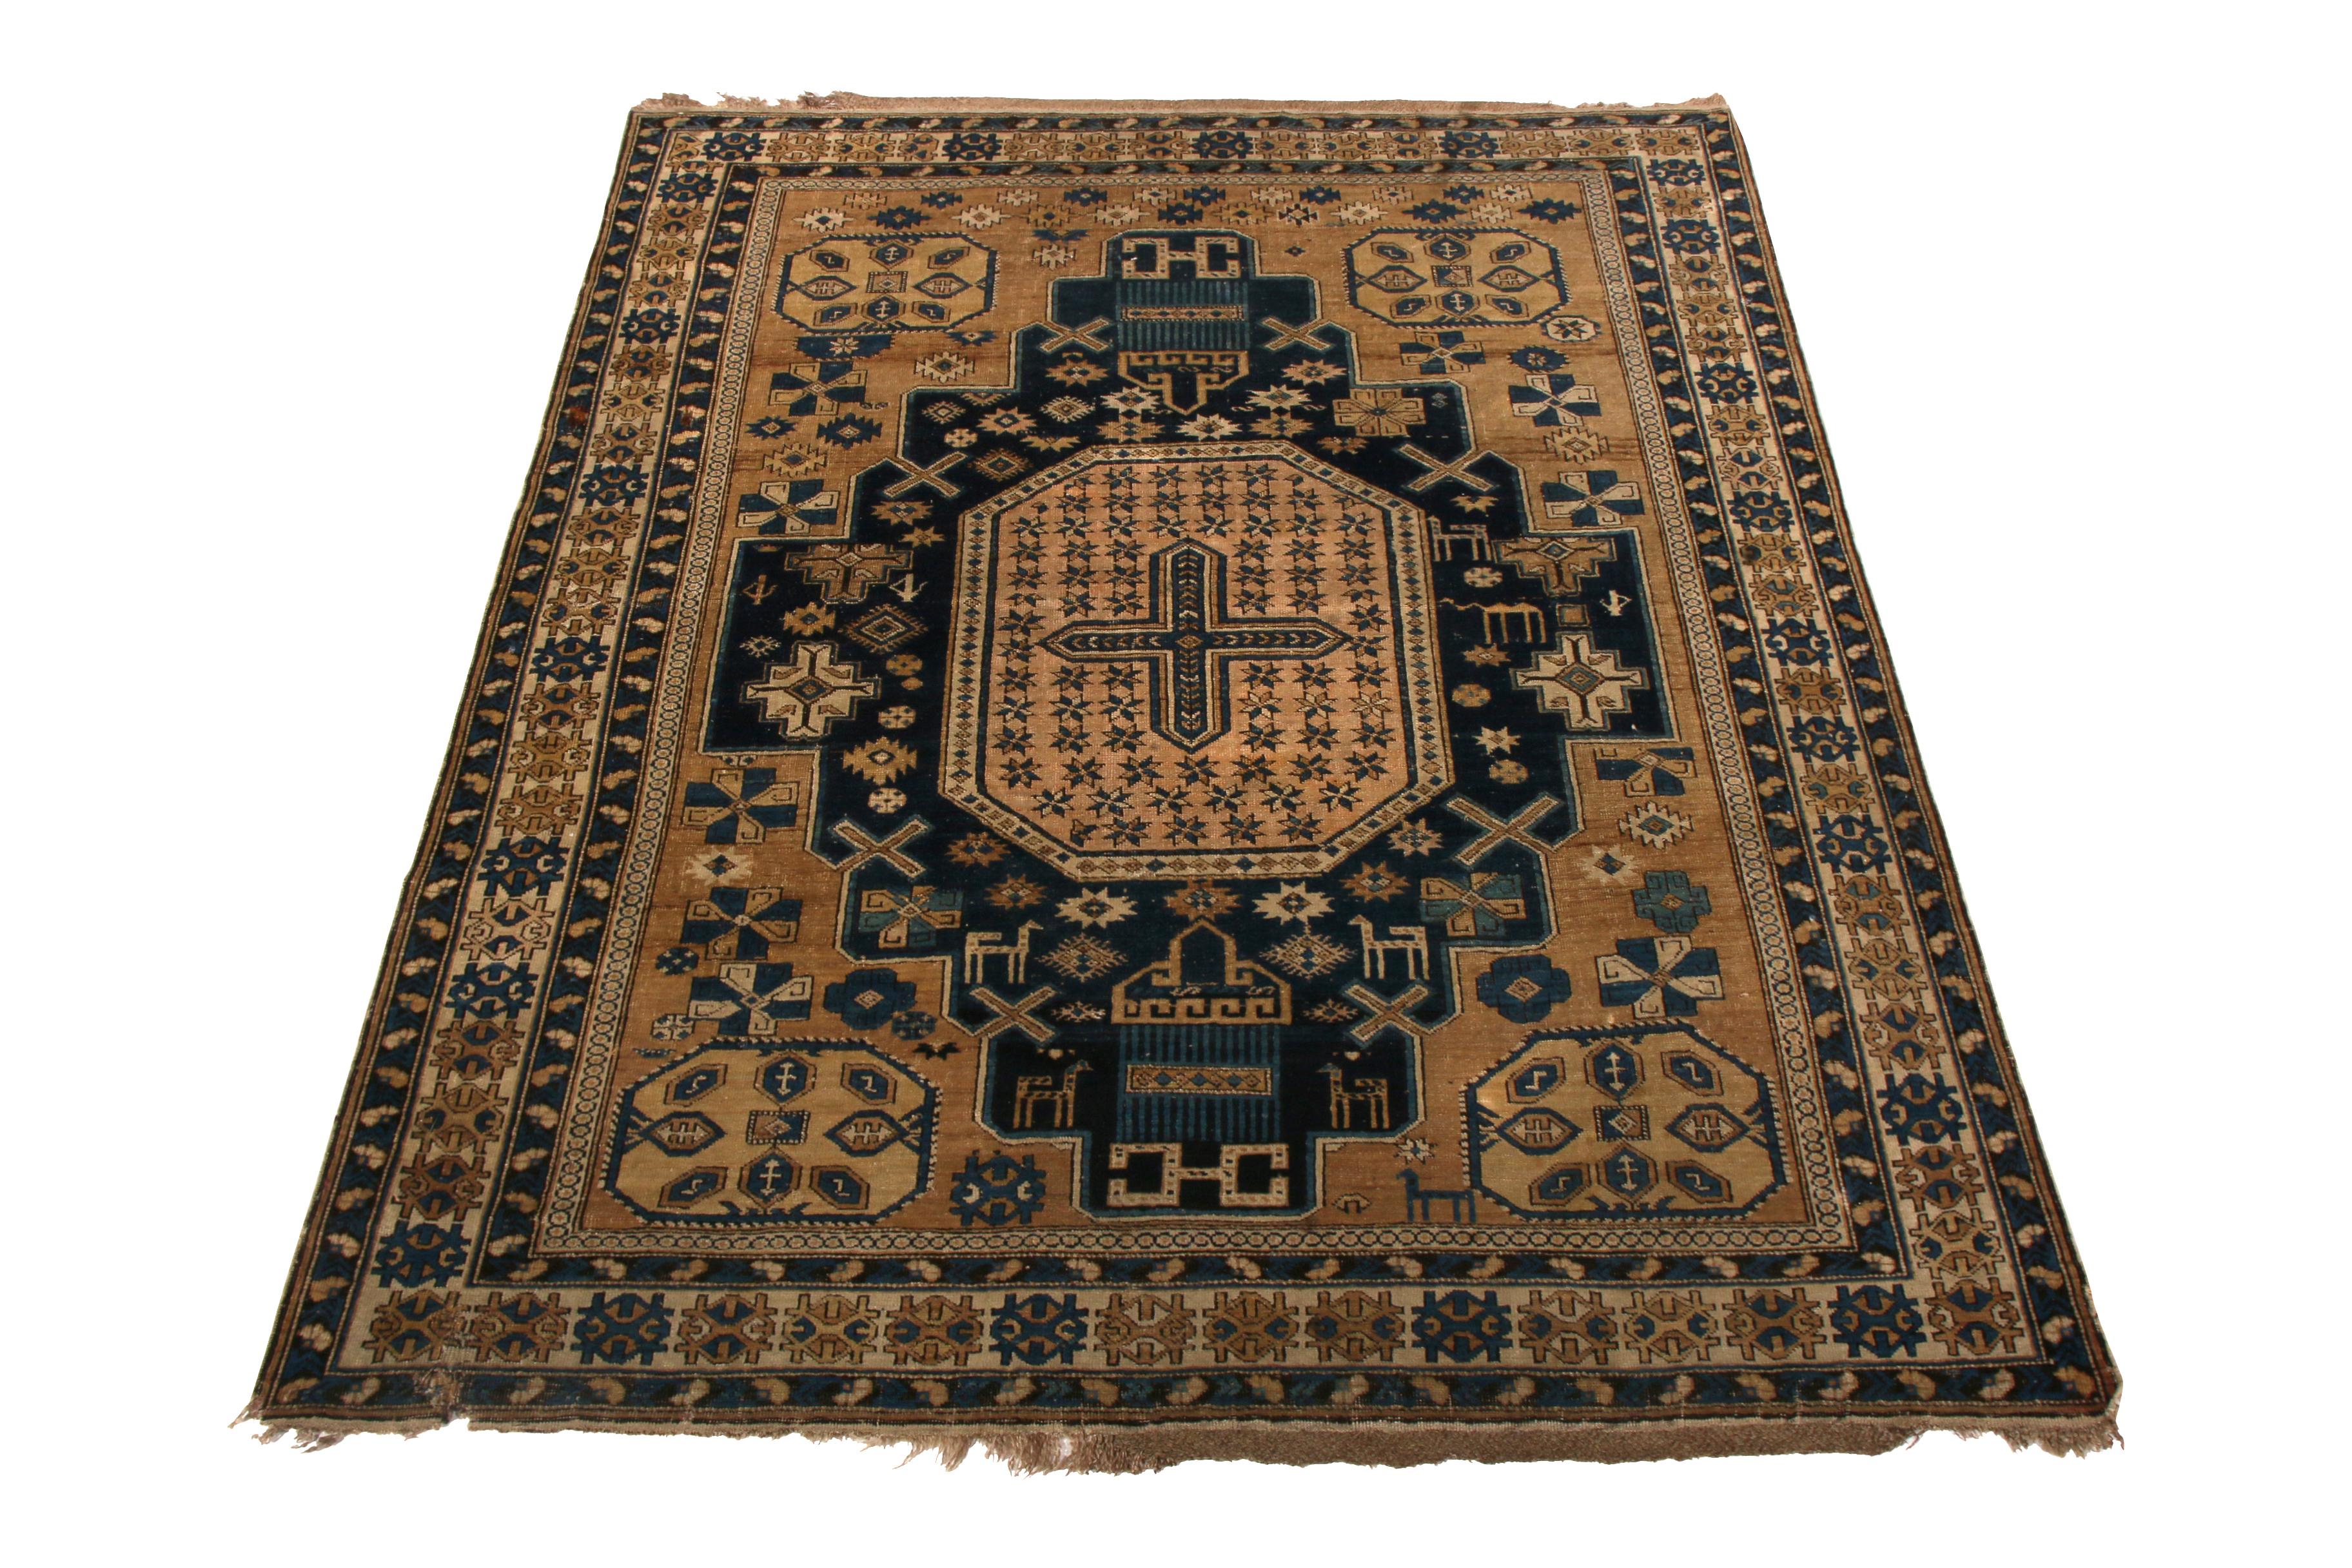 Hand knotted in wool originating from Russia between 1910-1920, this antique Kuba rug enjoys a more regal take on traditional colorway hues this time-honored rug family celebrates, a play of rich beige brown and abrashed blue bringing out the